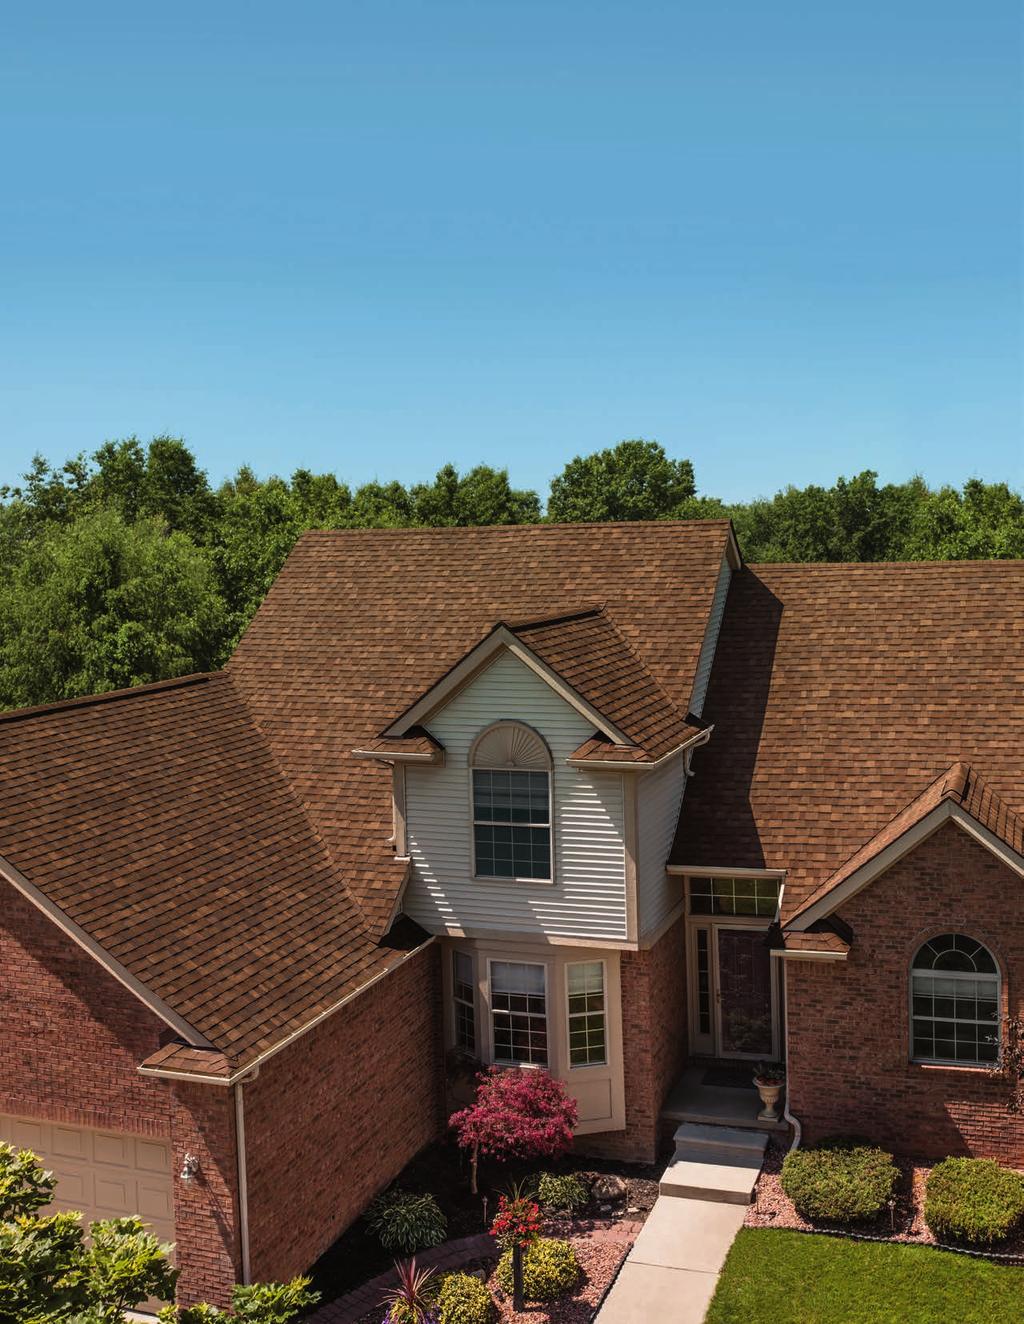 At Owens Corning Roofing, we re always looking for ways to help you express your sense of style through your home, which